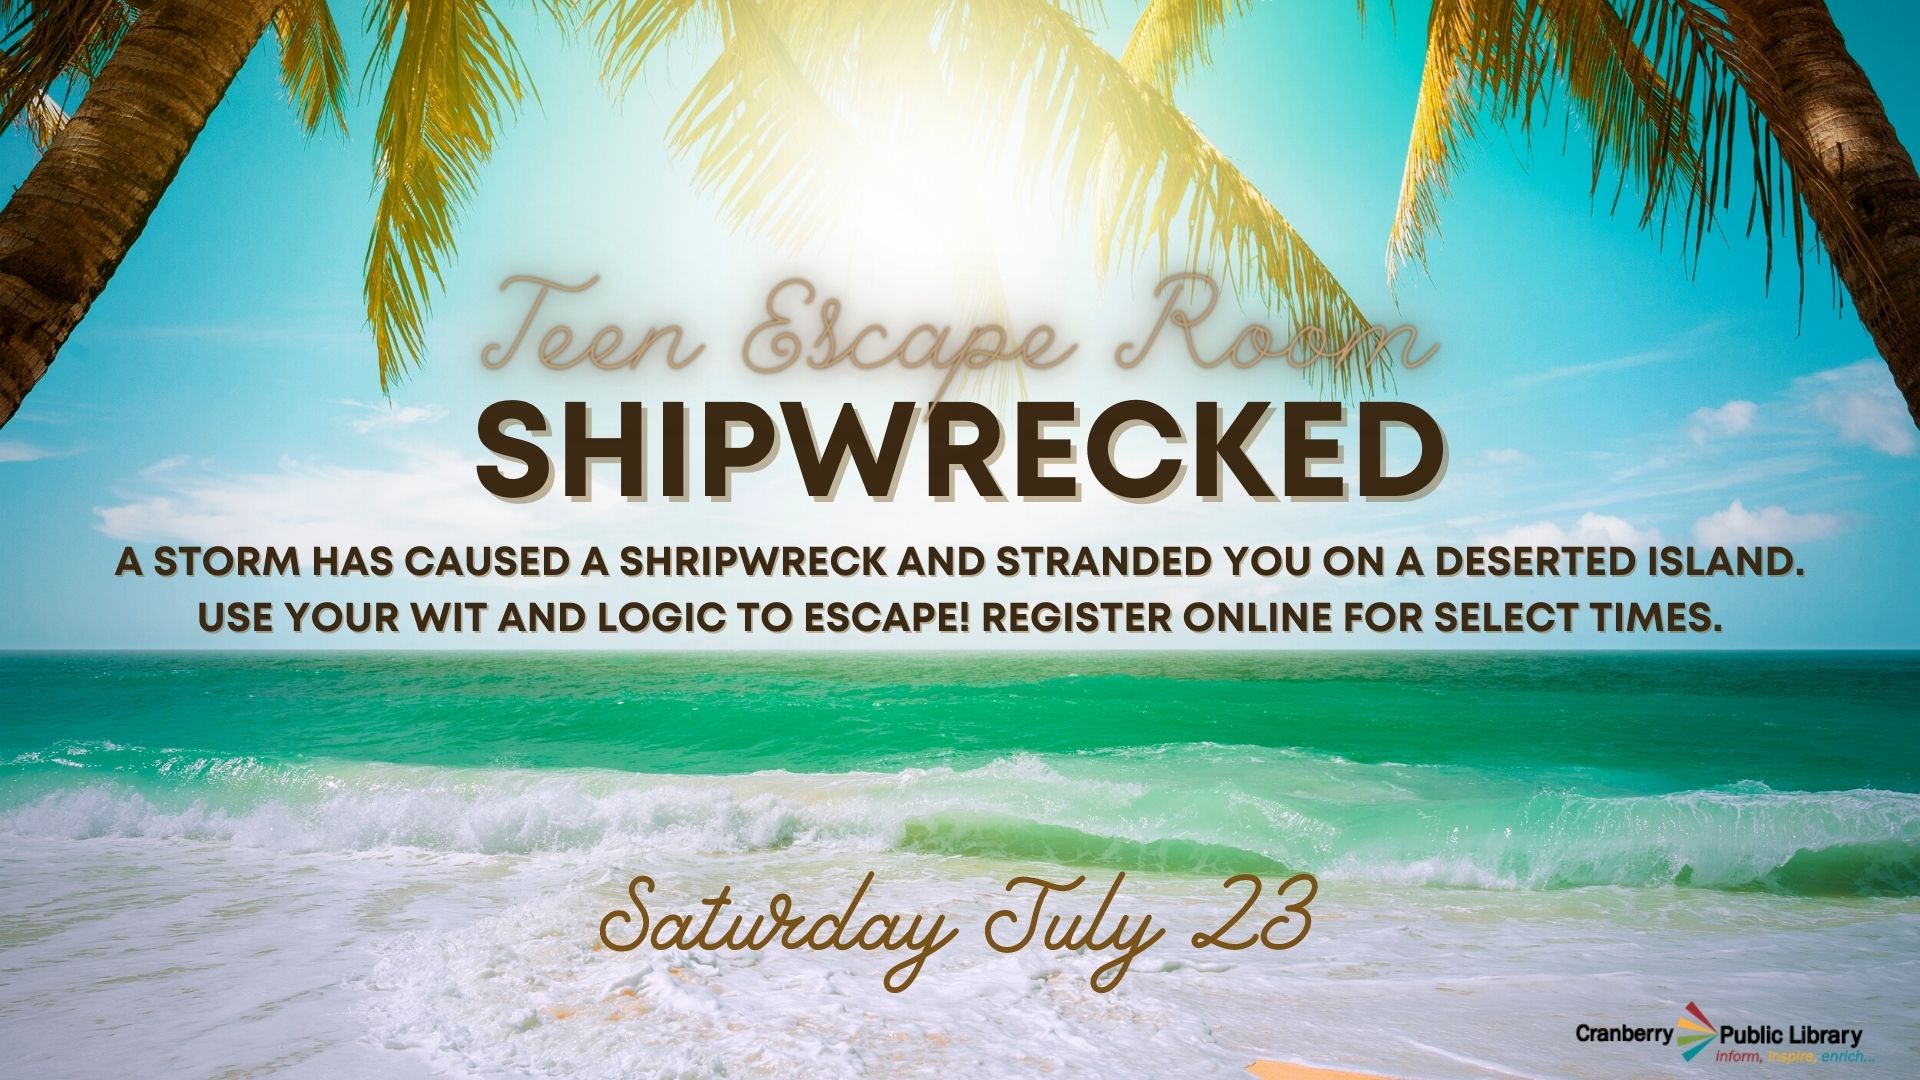 Flyer for Teen Escape Room - Shipwrecked